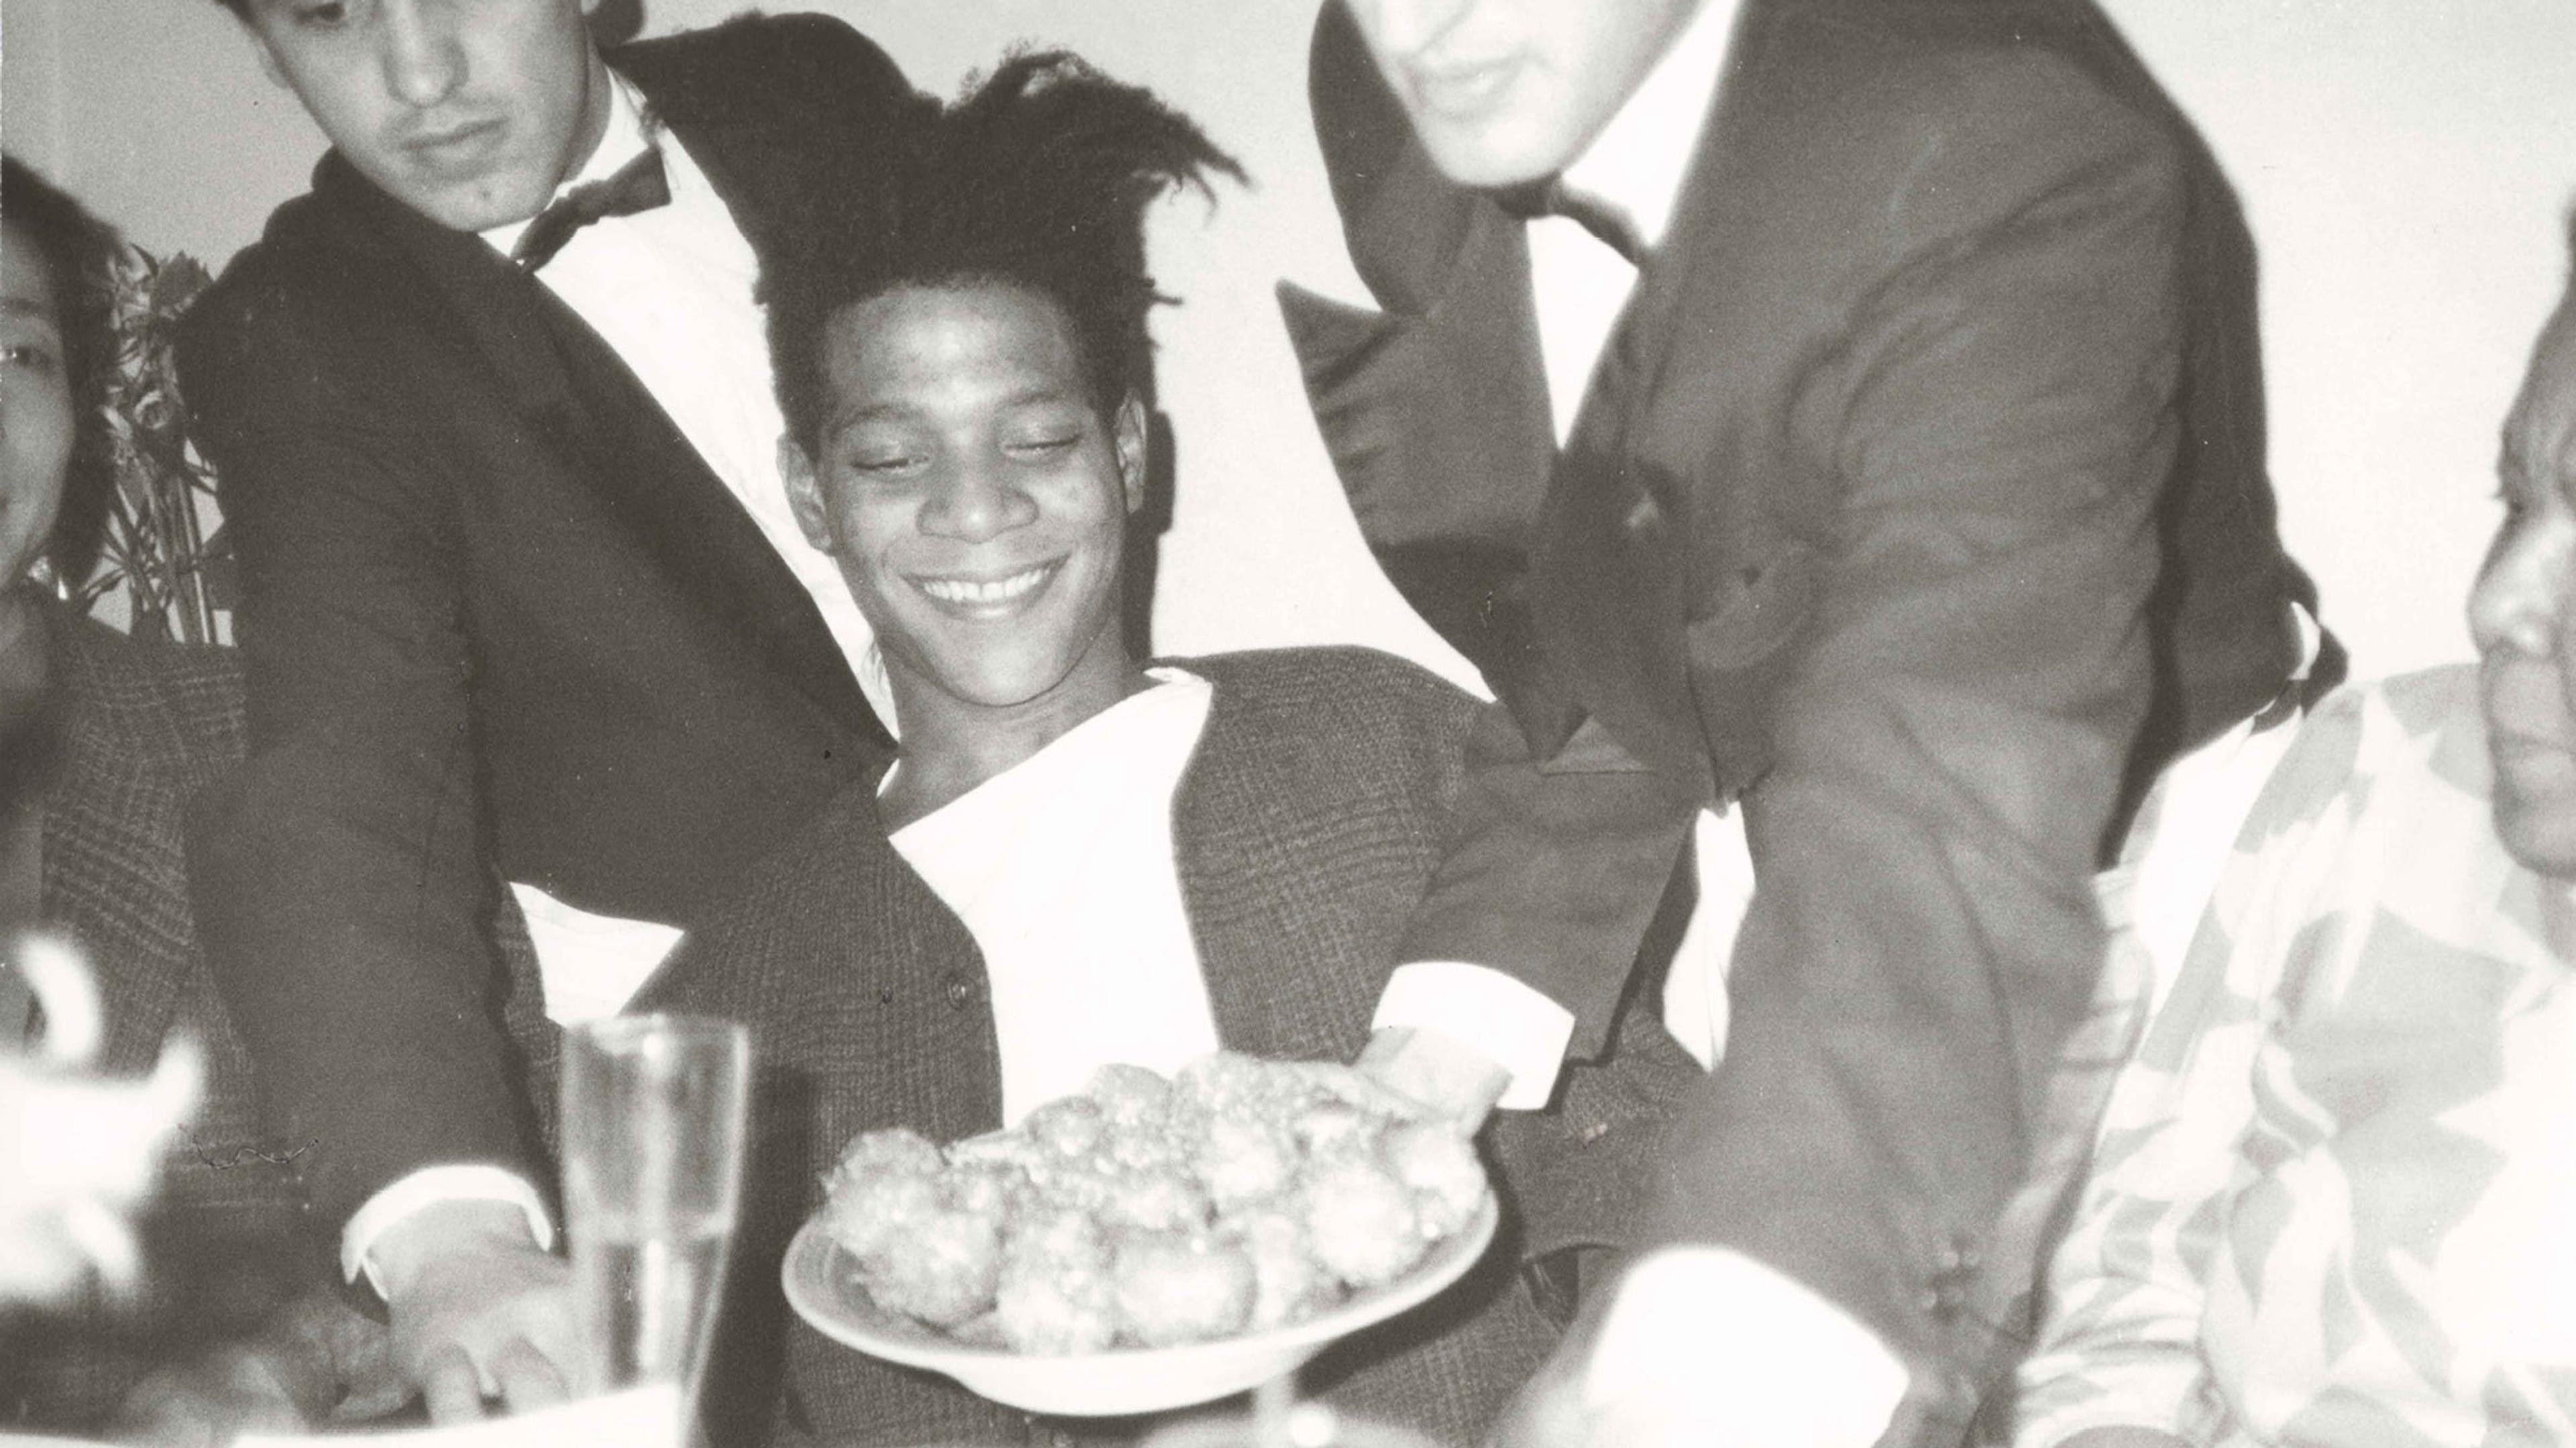 A black-and-white photograph of a smiling young man being handed a plate of food by two waiters in tuxedos